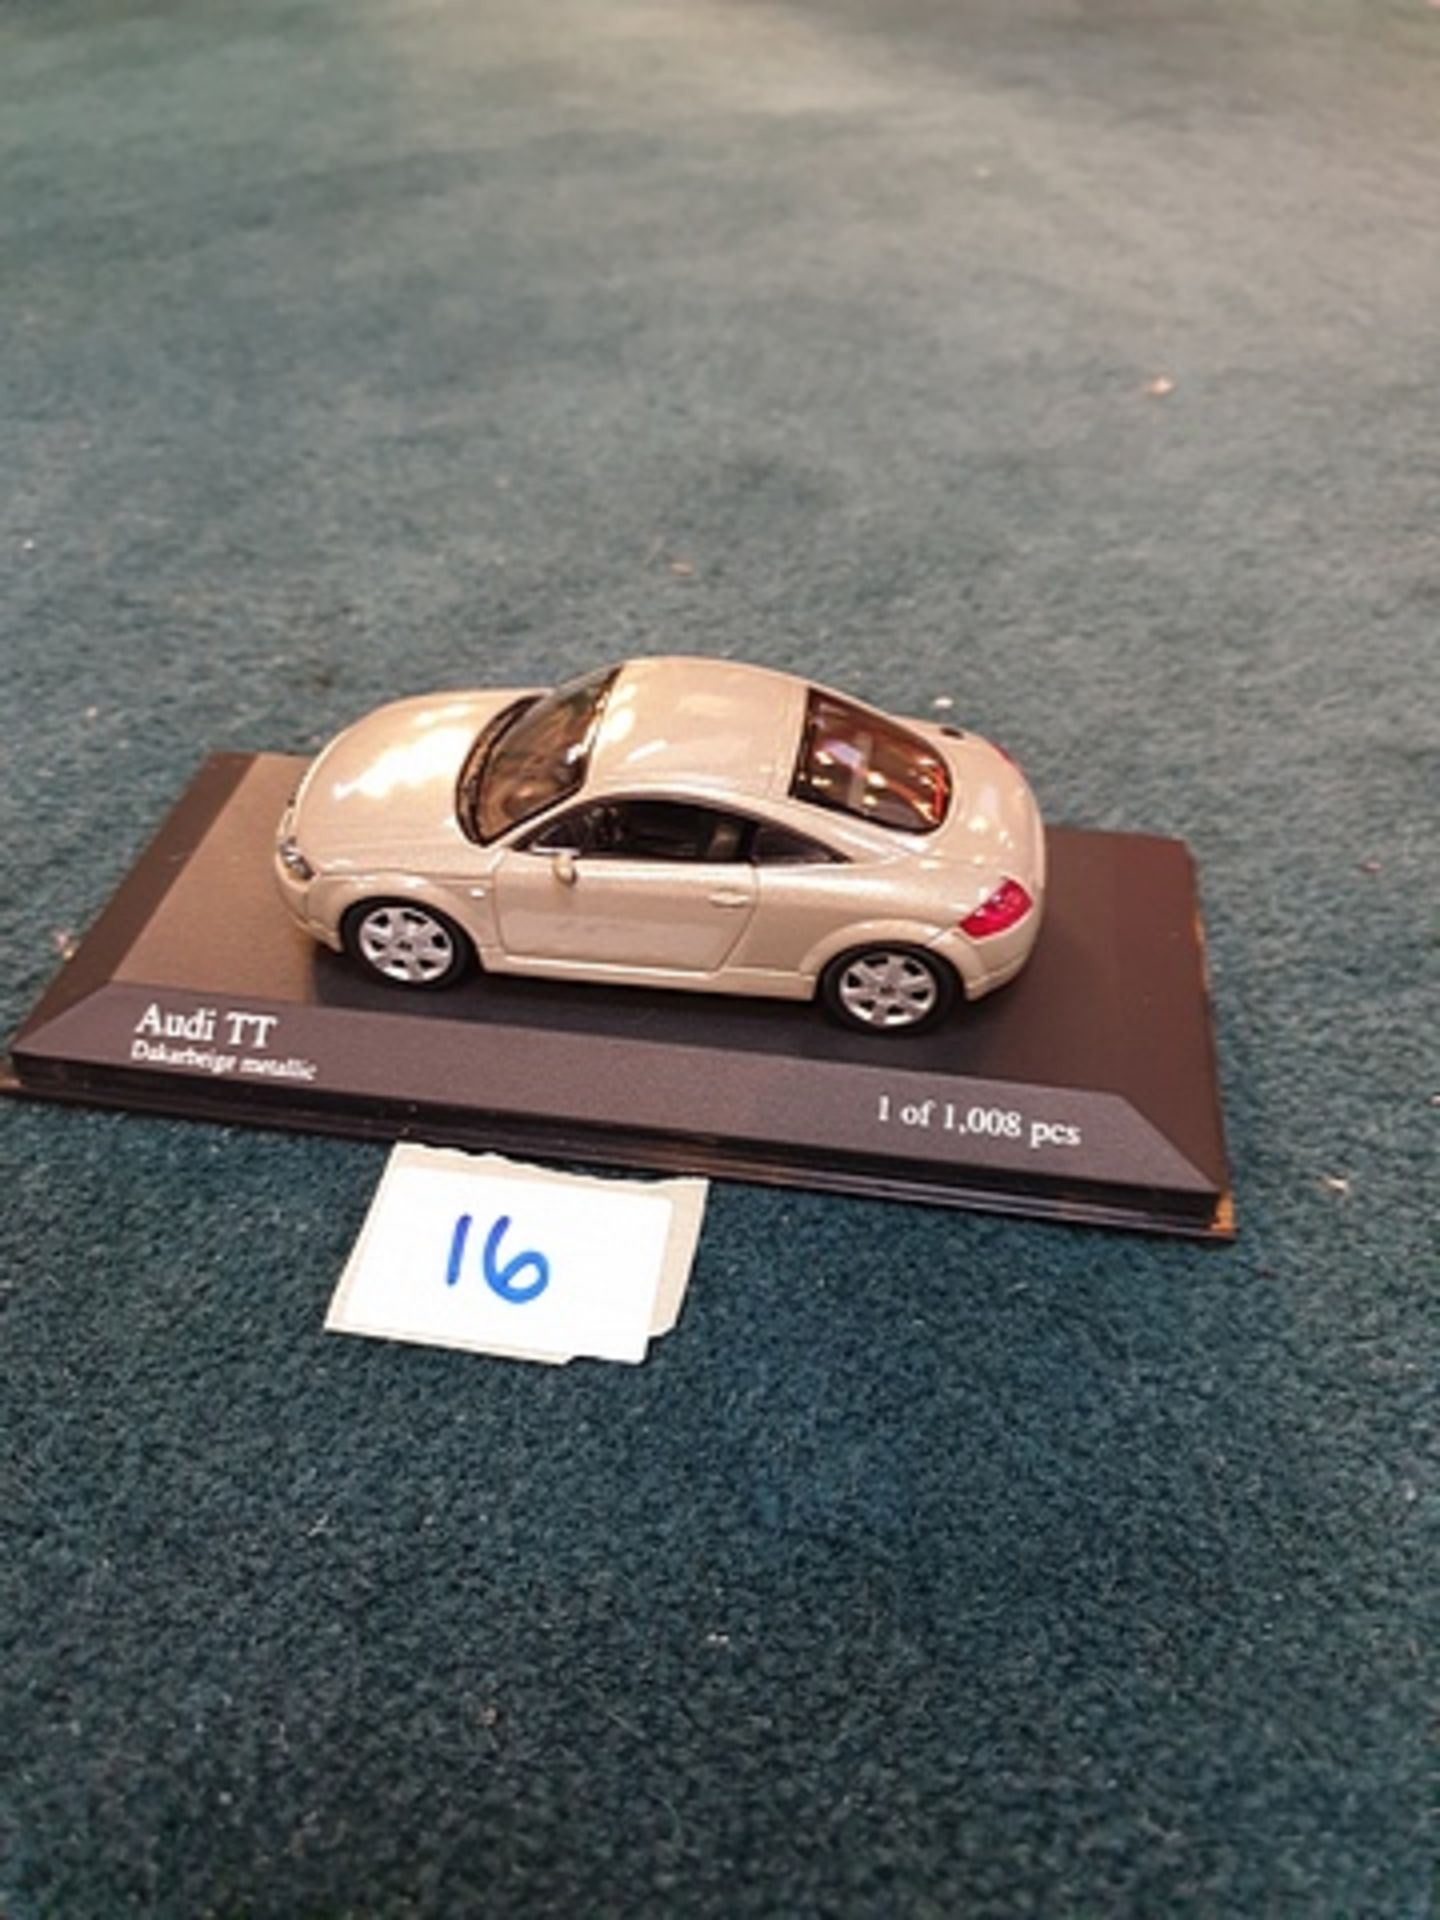 Minichamps Scale 1/43 Model 430 017254 Audi TT Coupe 1999 Beige Metallic Complete With Box - Image 2 of 2